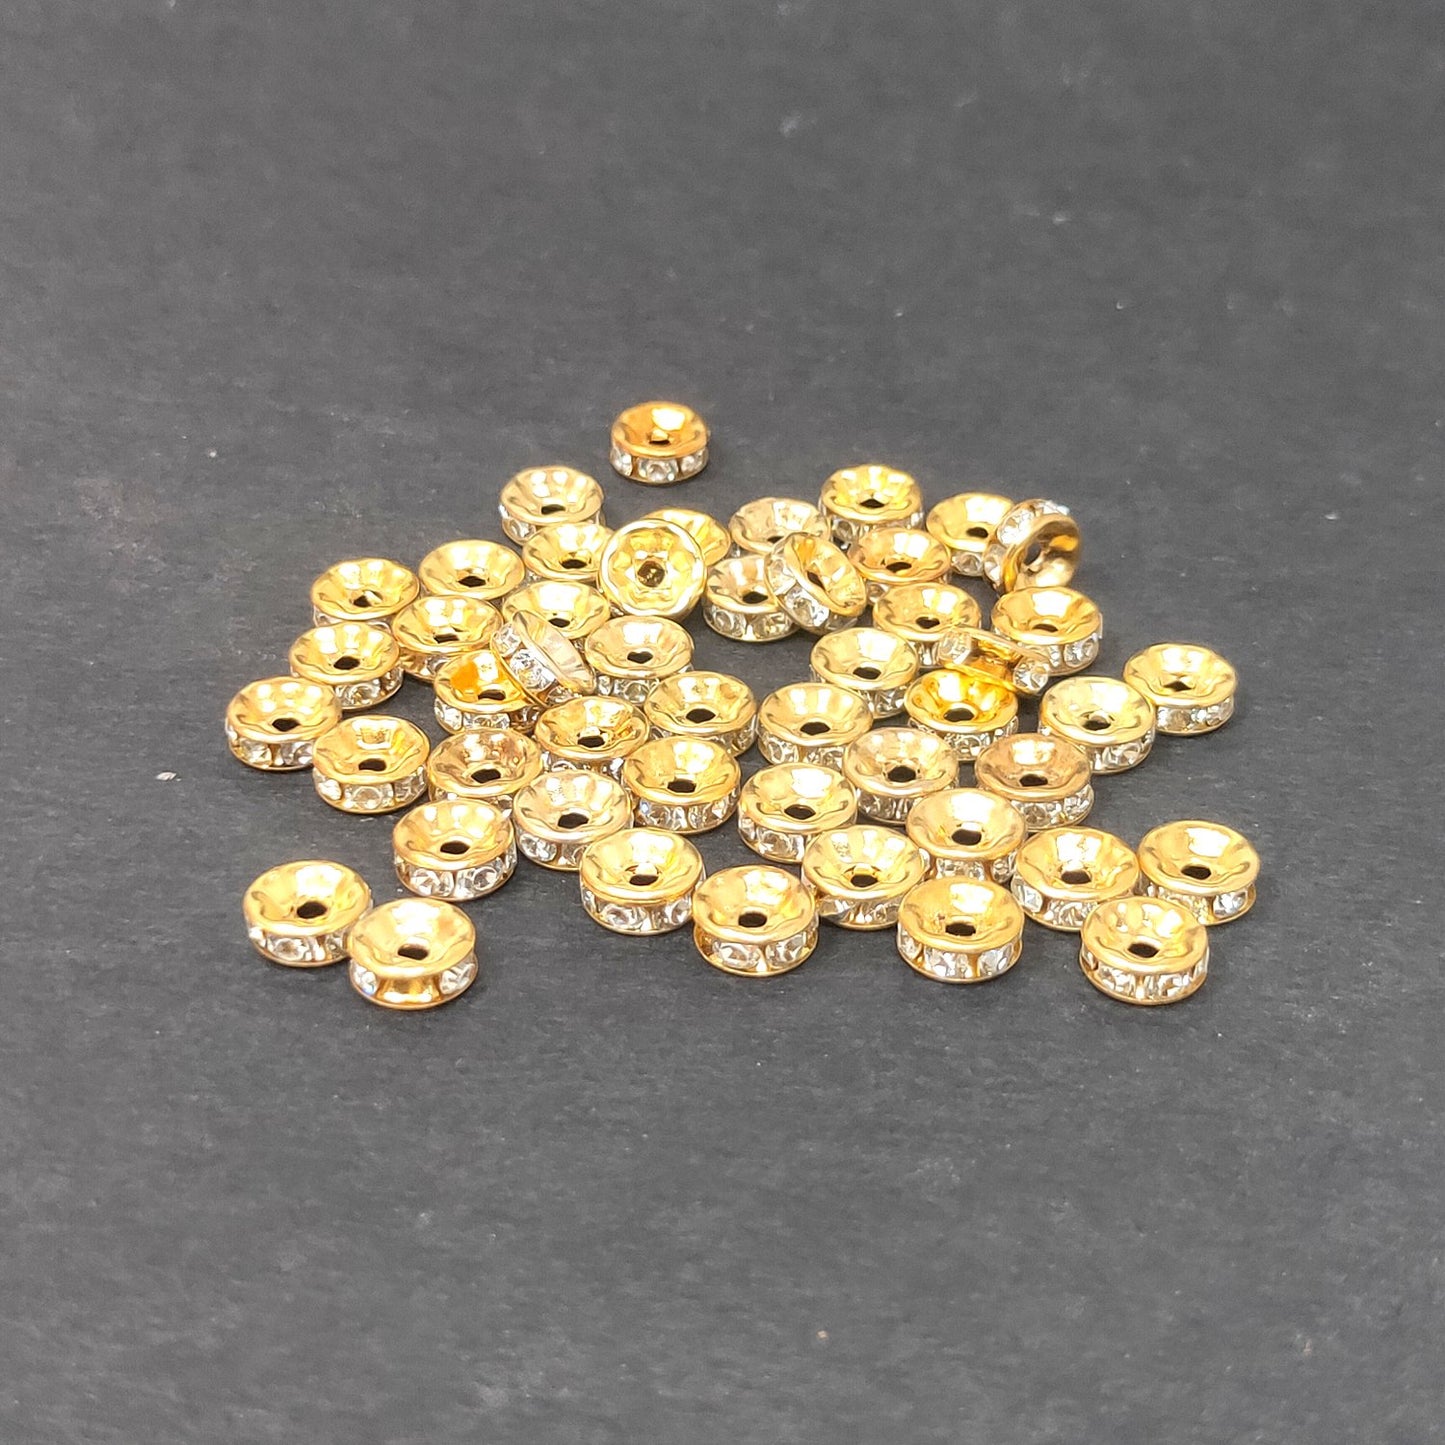 8 mm Spacer Beads with Stone Studded for Making Jewellery (100 Beads) - 96-21